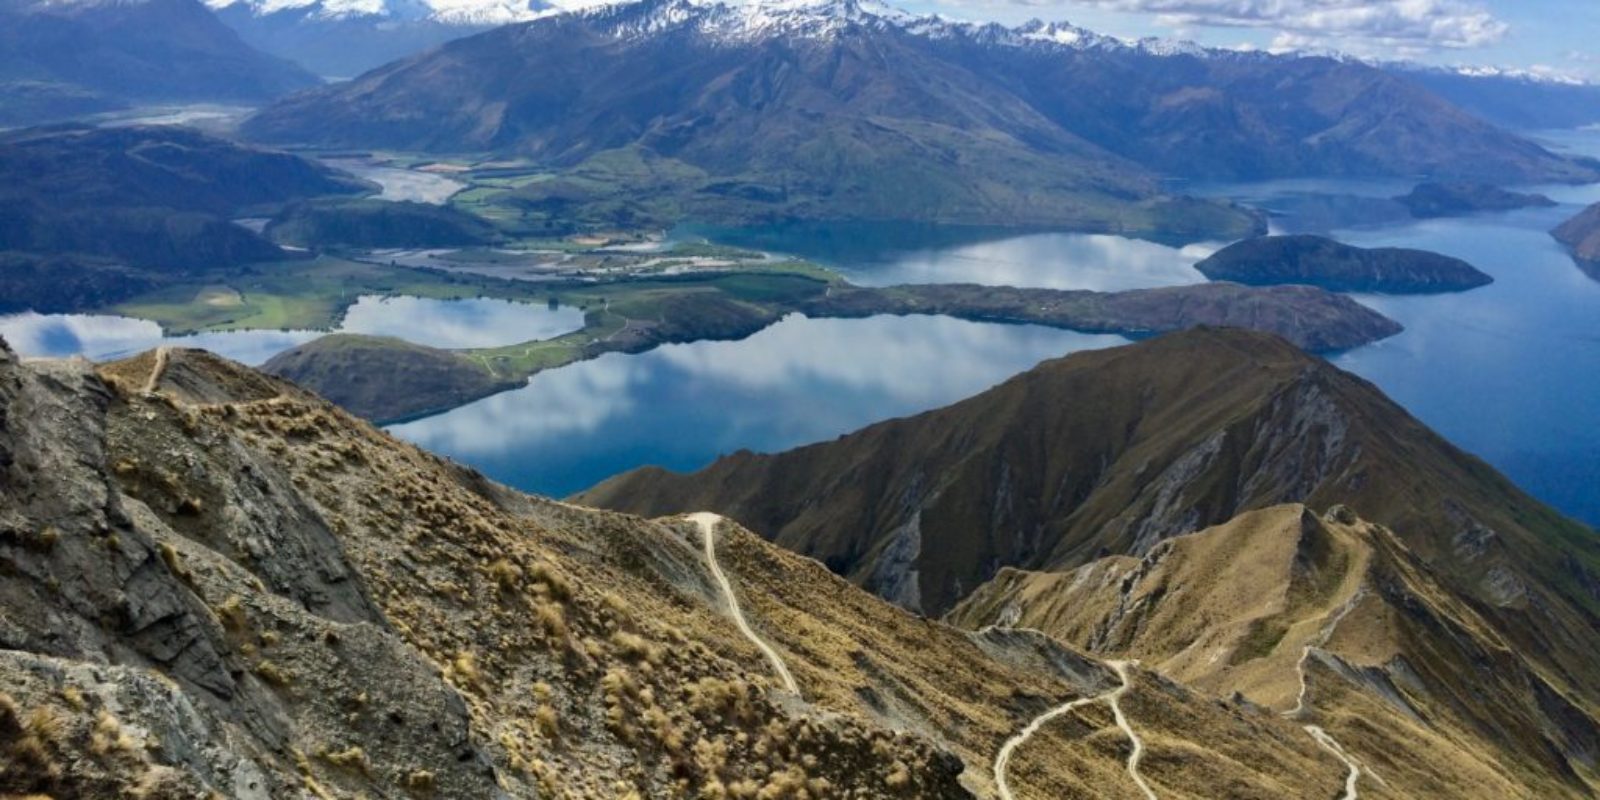 Queenstown, New Zealand is a snowbird's playground and a summer hiker's haven. It lies in an absolutely stunning spot at the top of Lake Wakatipu on New Zealand's South Island.